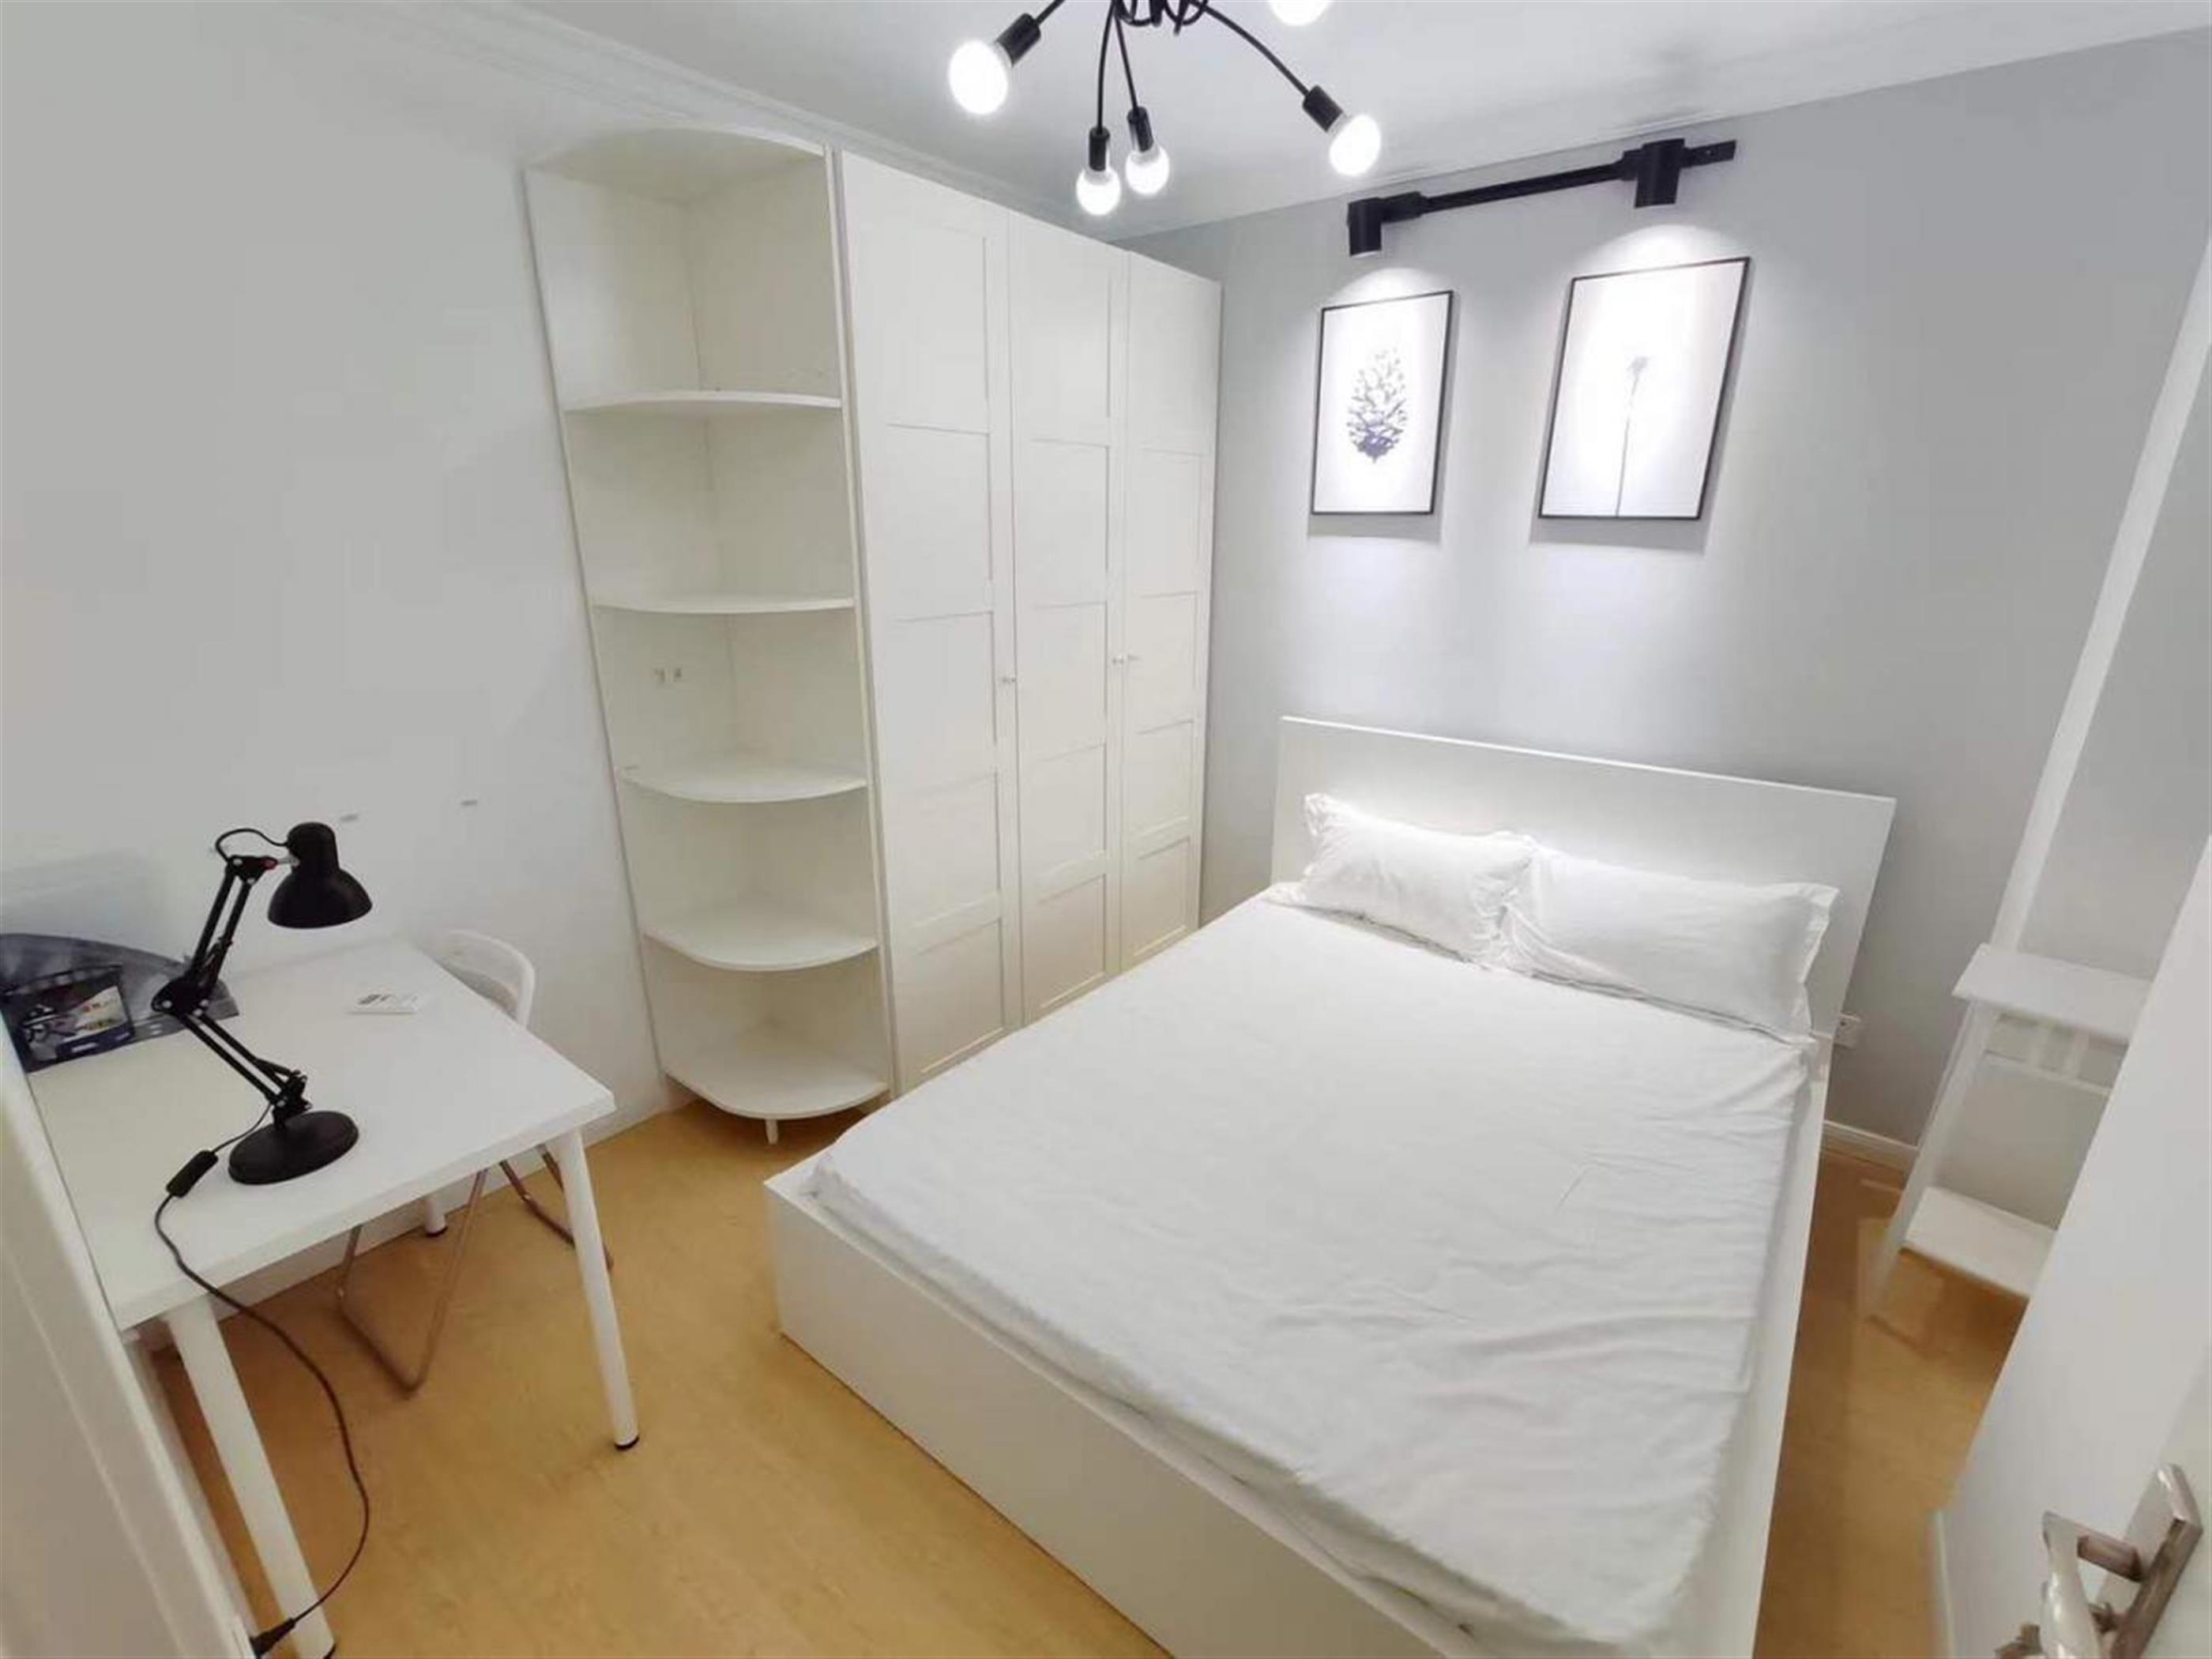 bright rooms Bright Clean Affordable Huaihai Road 2BR Apt Nr LN 1/10/12/13 for Rent in Shanghai